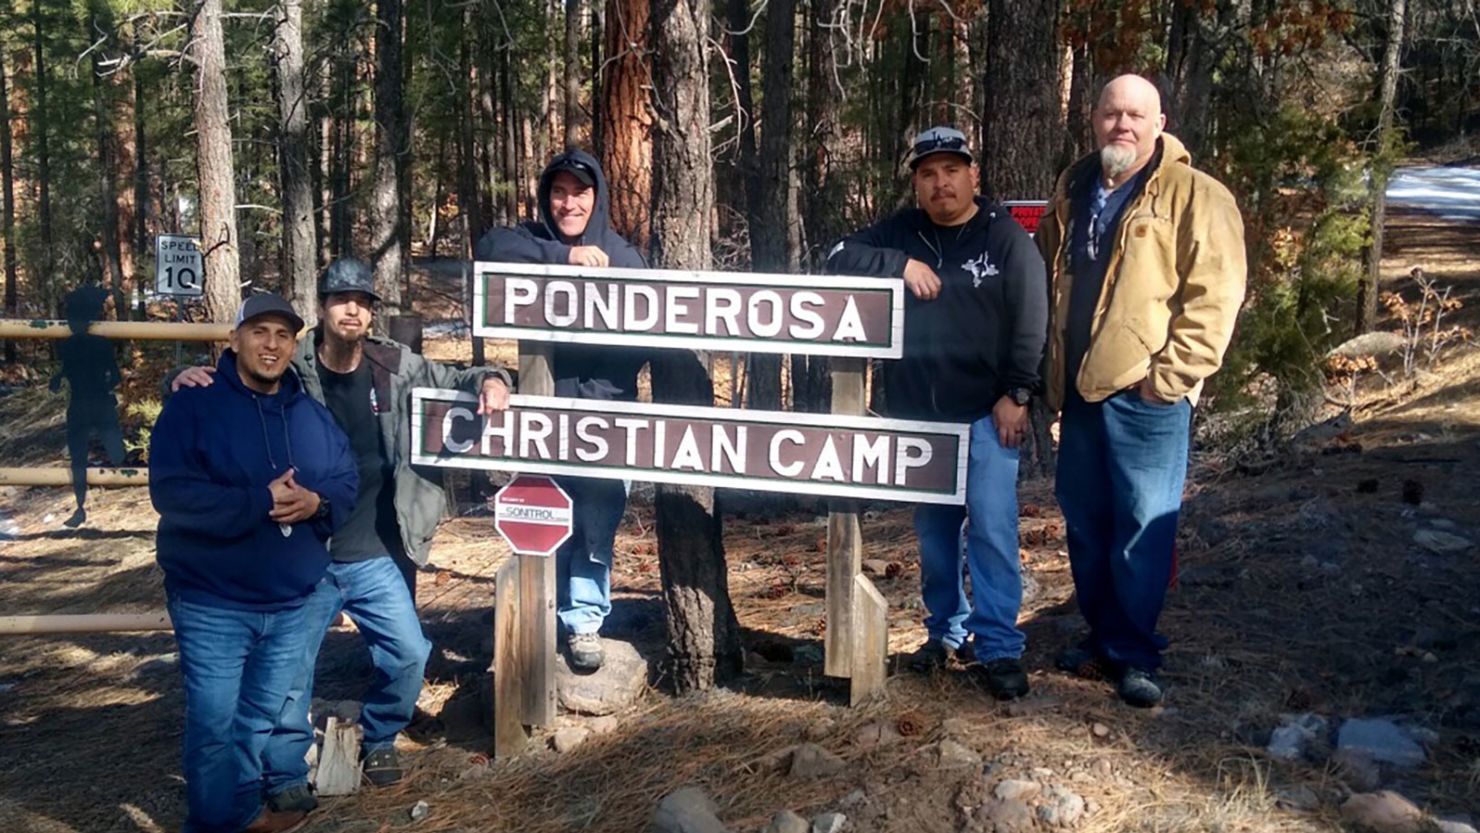 Joshua Melendrez, far left, stands next to his business partner, Lawrence Jaramillo, and other members of the team.